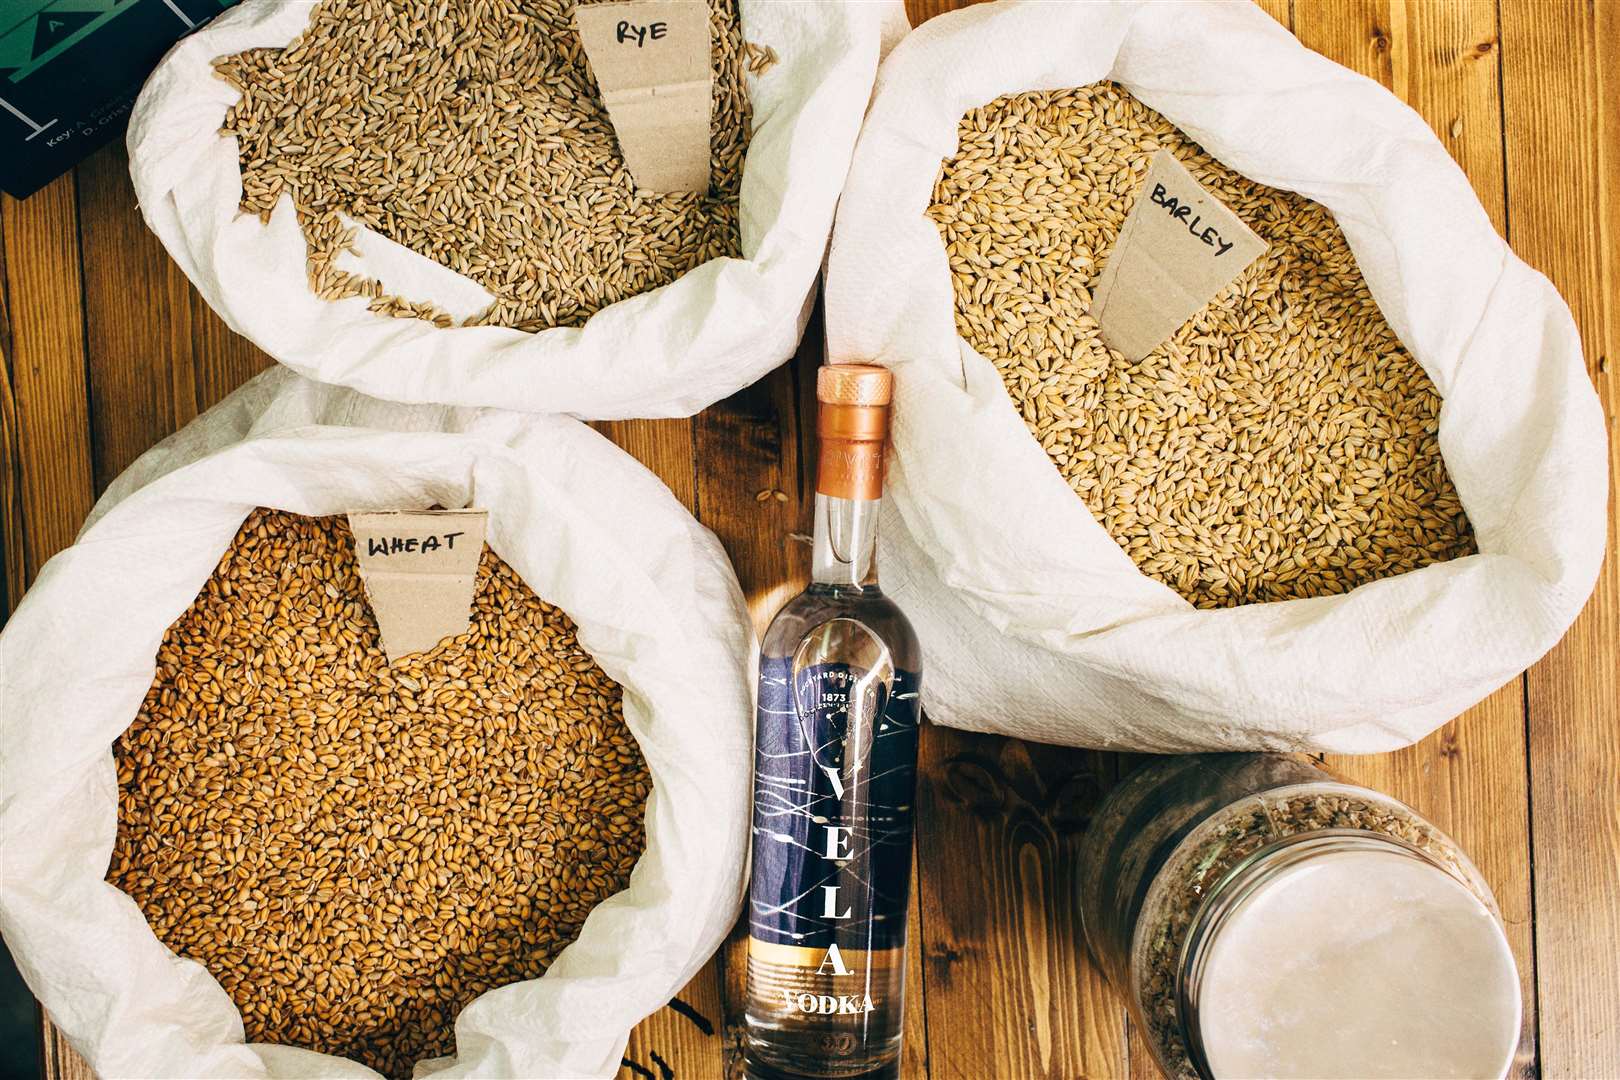 Copper Rivet Distillery produces gin and vodka at Chatham Dockyard using grains grown on Sheppey